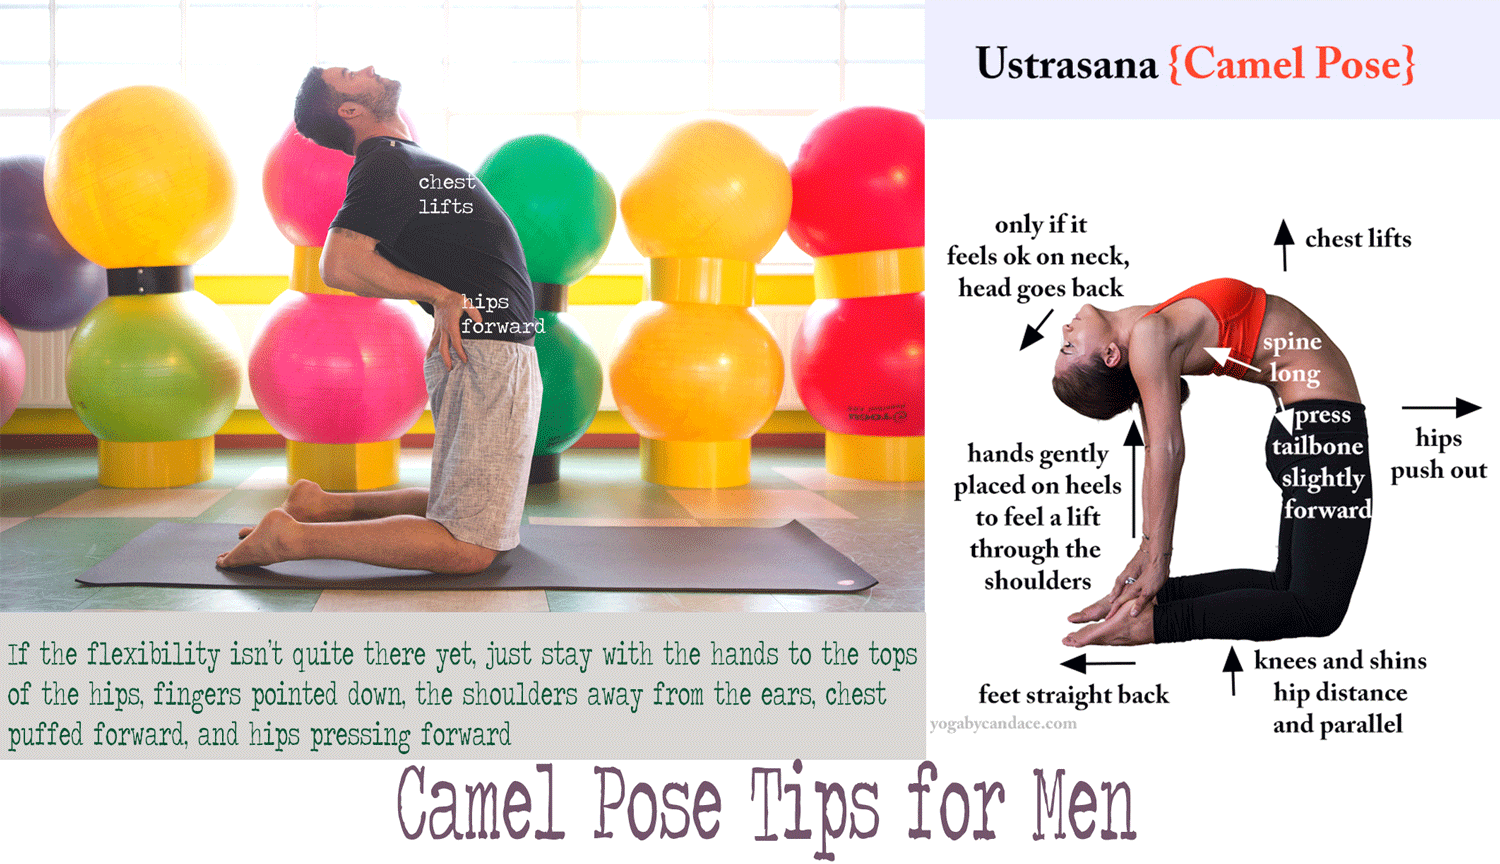 Ustrasana (Camel Pose Steps): Facts,How to do, Benefits | Yoga facts, Learn  yoga, Yoga for beginners